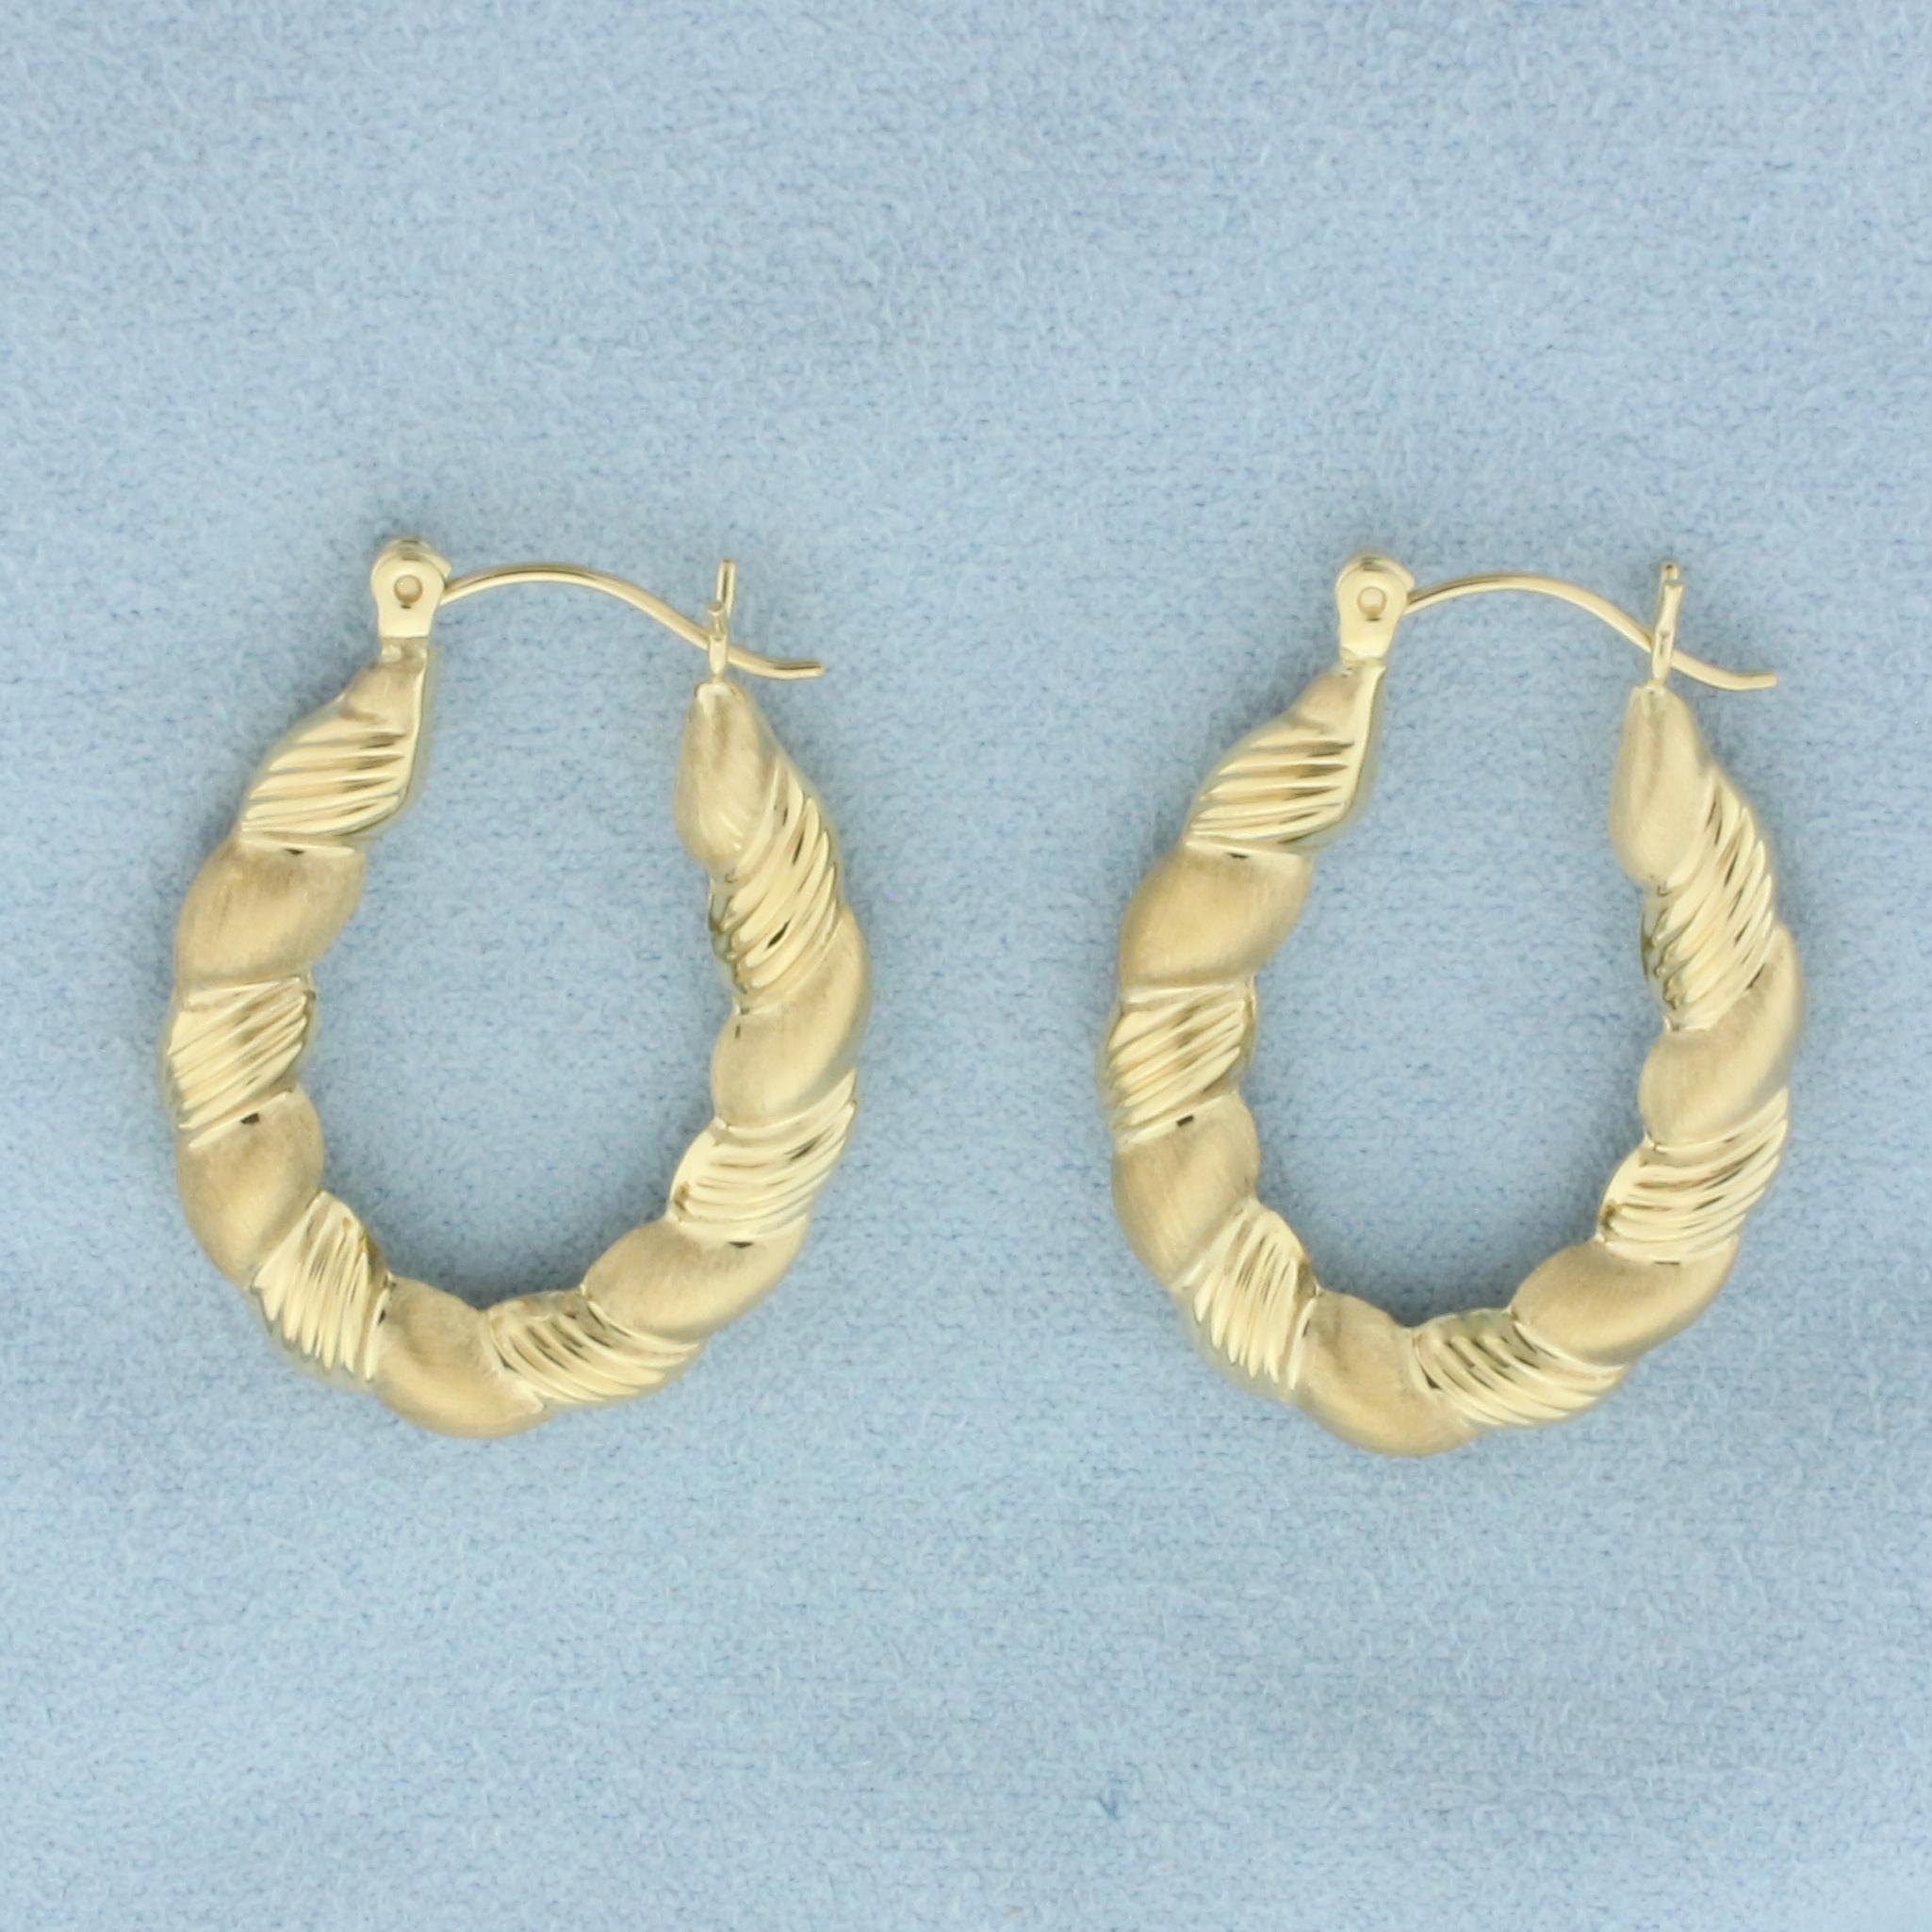 Matte And High Polish Finish Scalloped Hoop Earrings In 14k Yellow Gold